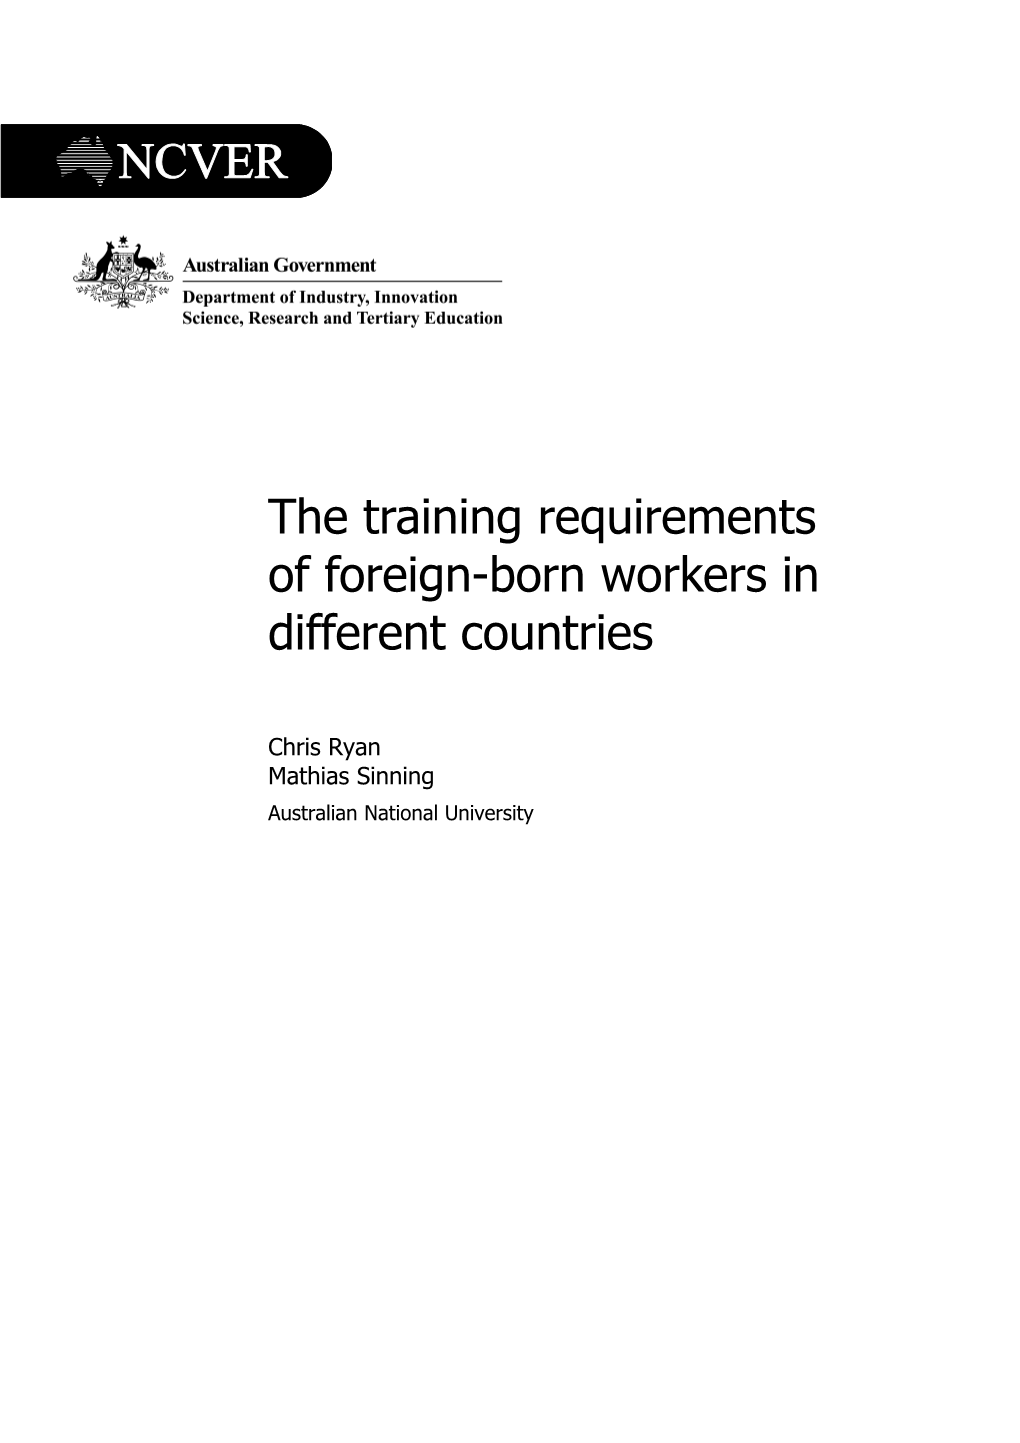 Foreign-Born Workers